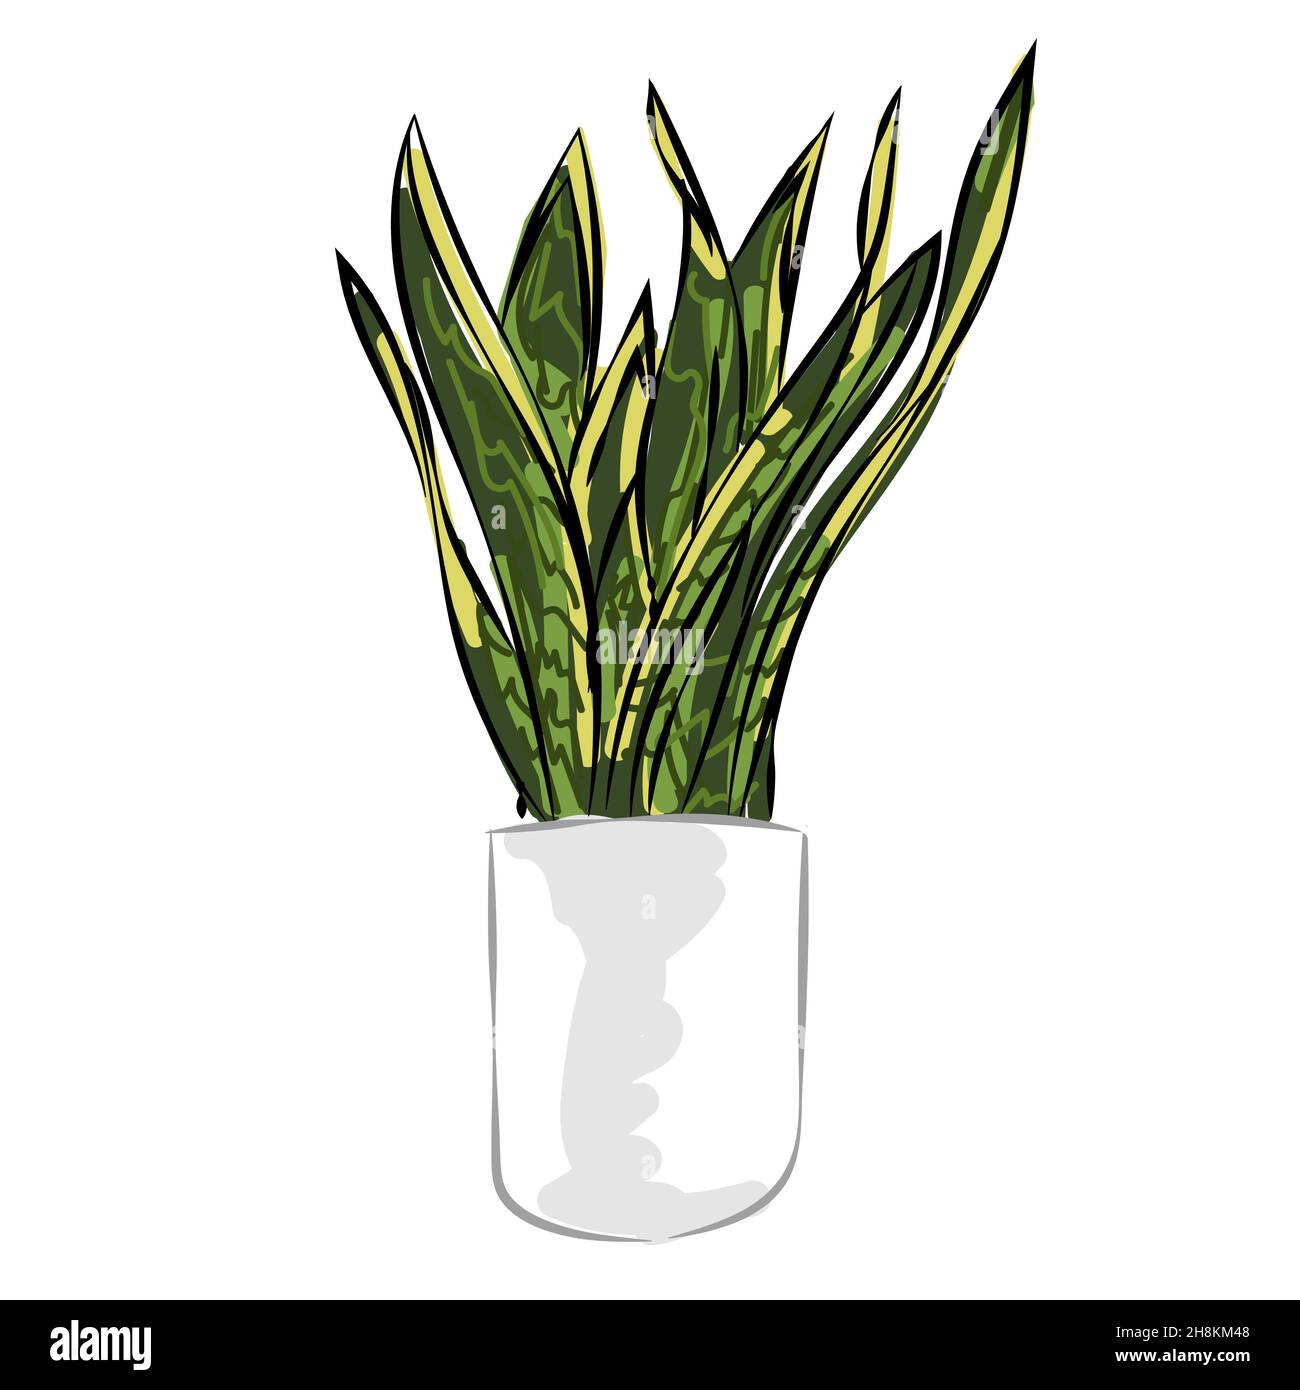 Wall Art Print | gold snake plant | Abposters.com